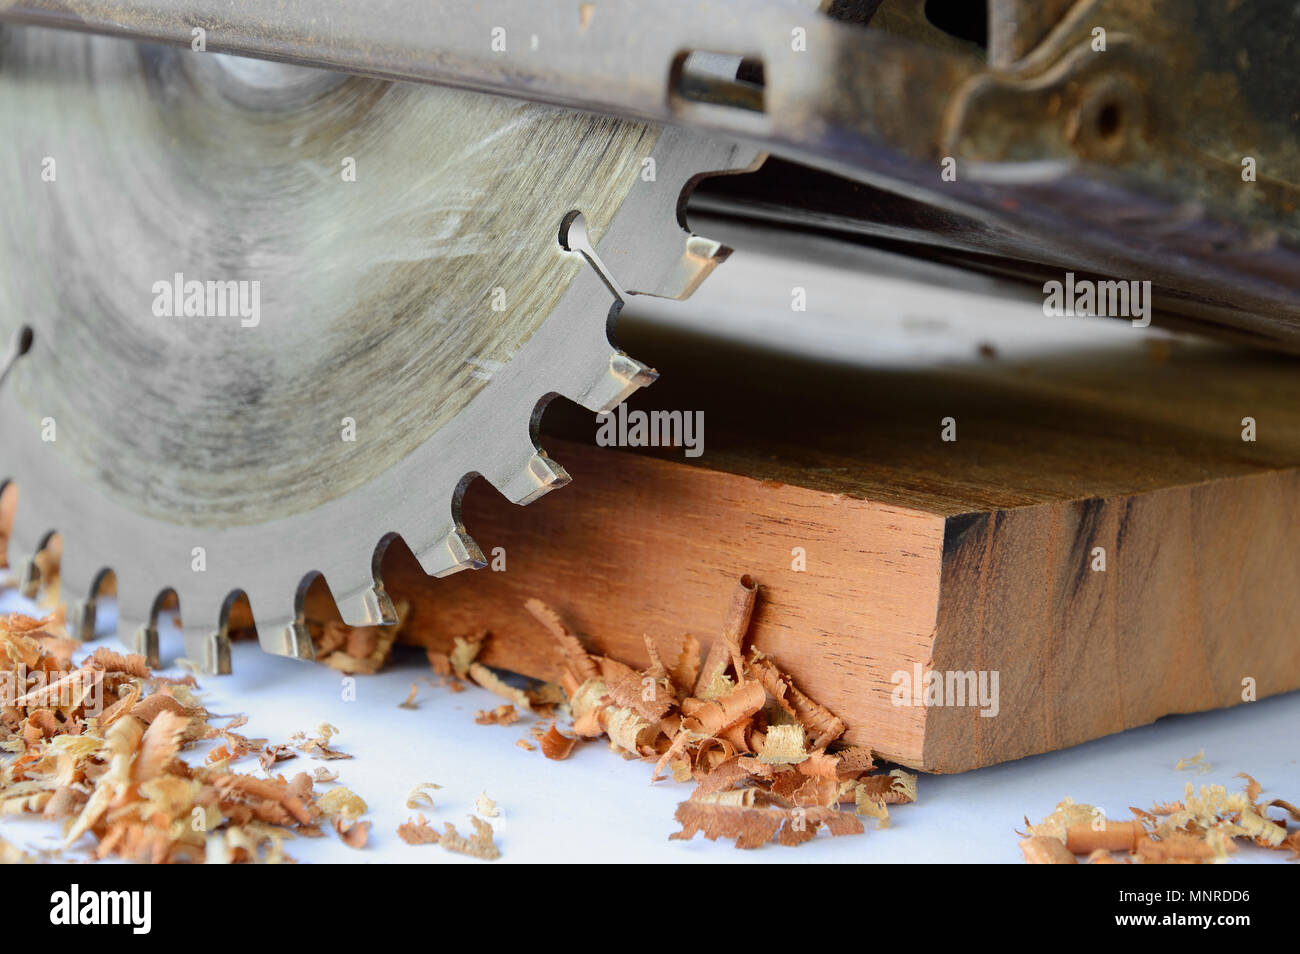 close up of circular saw and saw dust Stock Photo